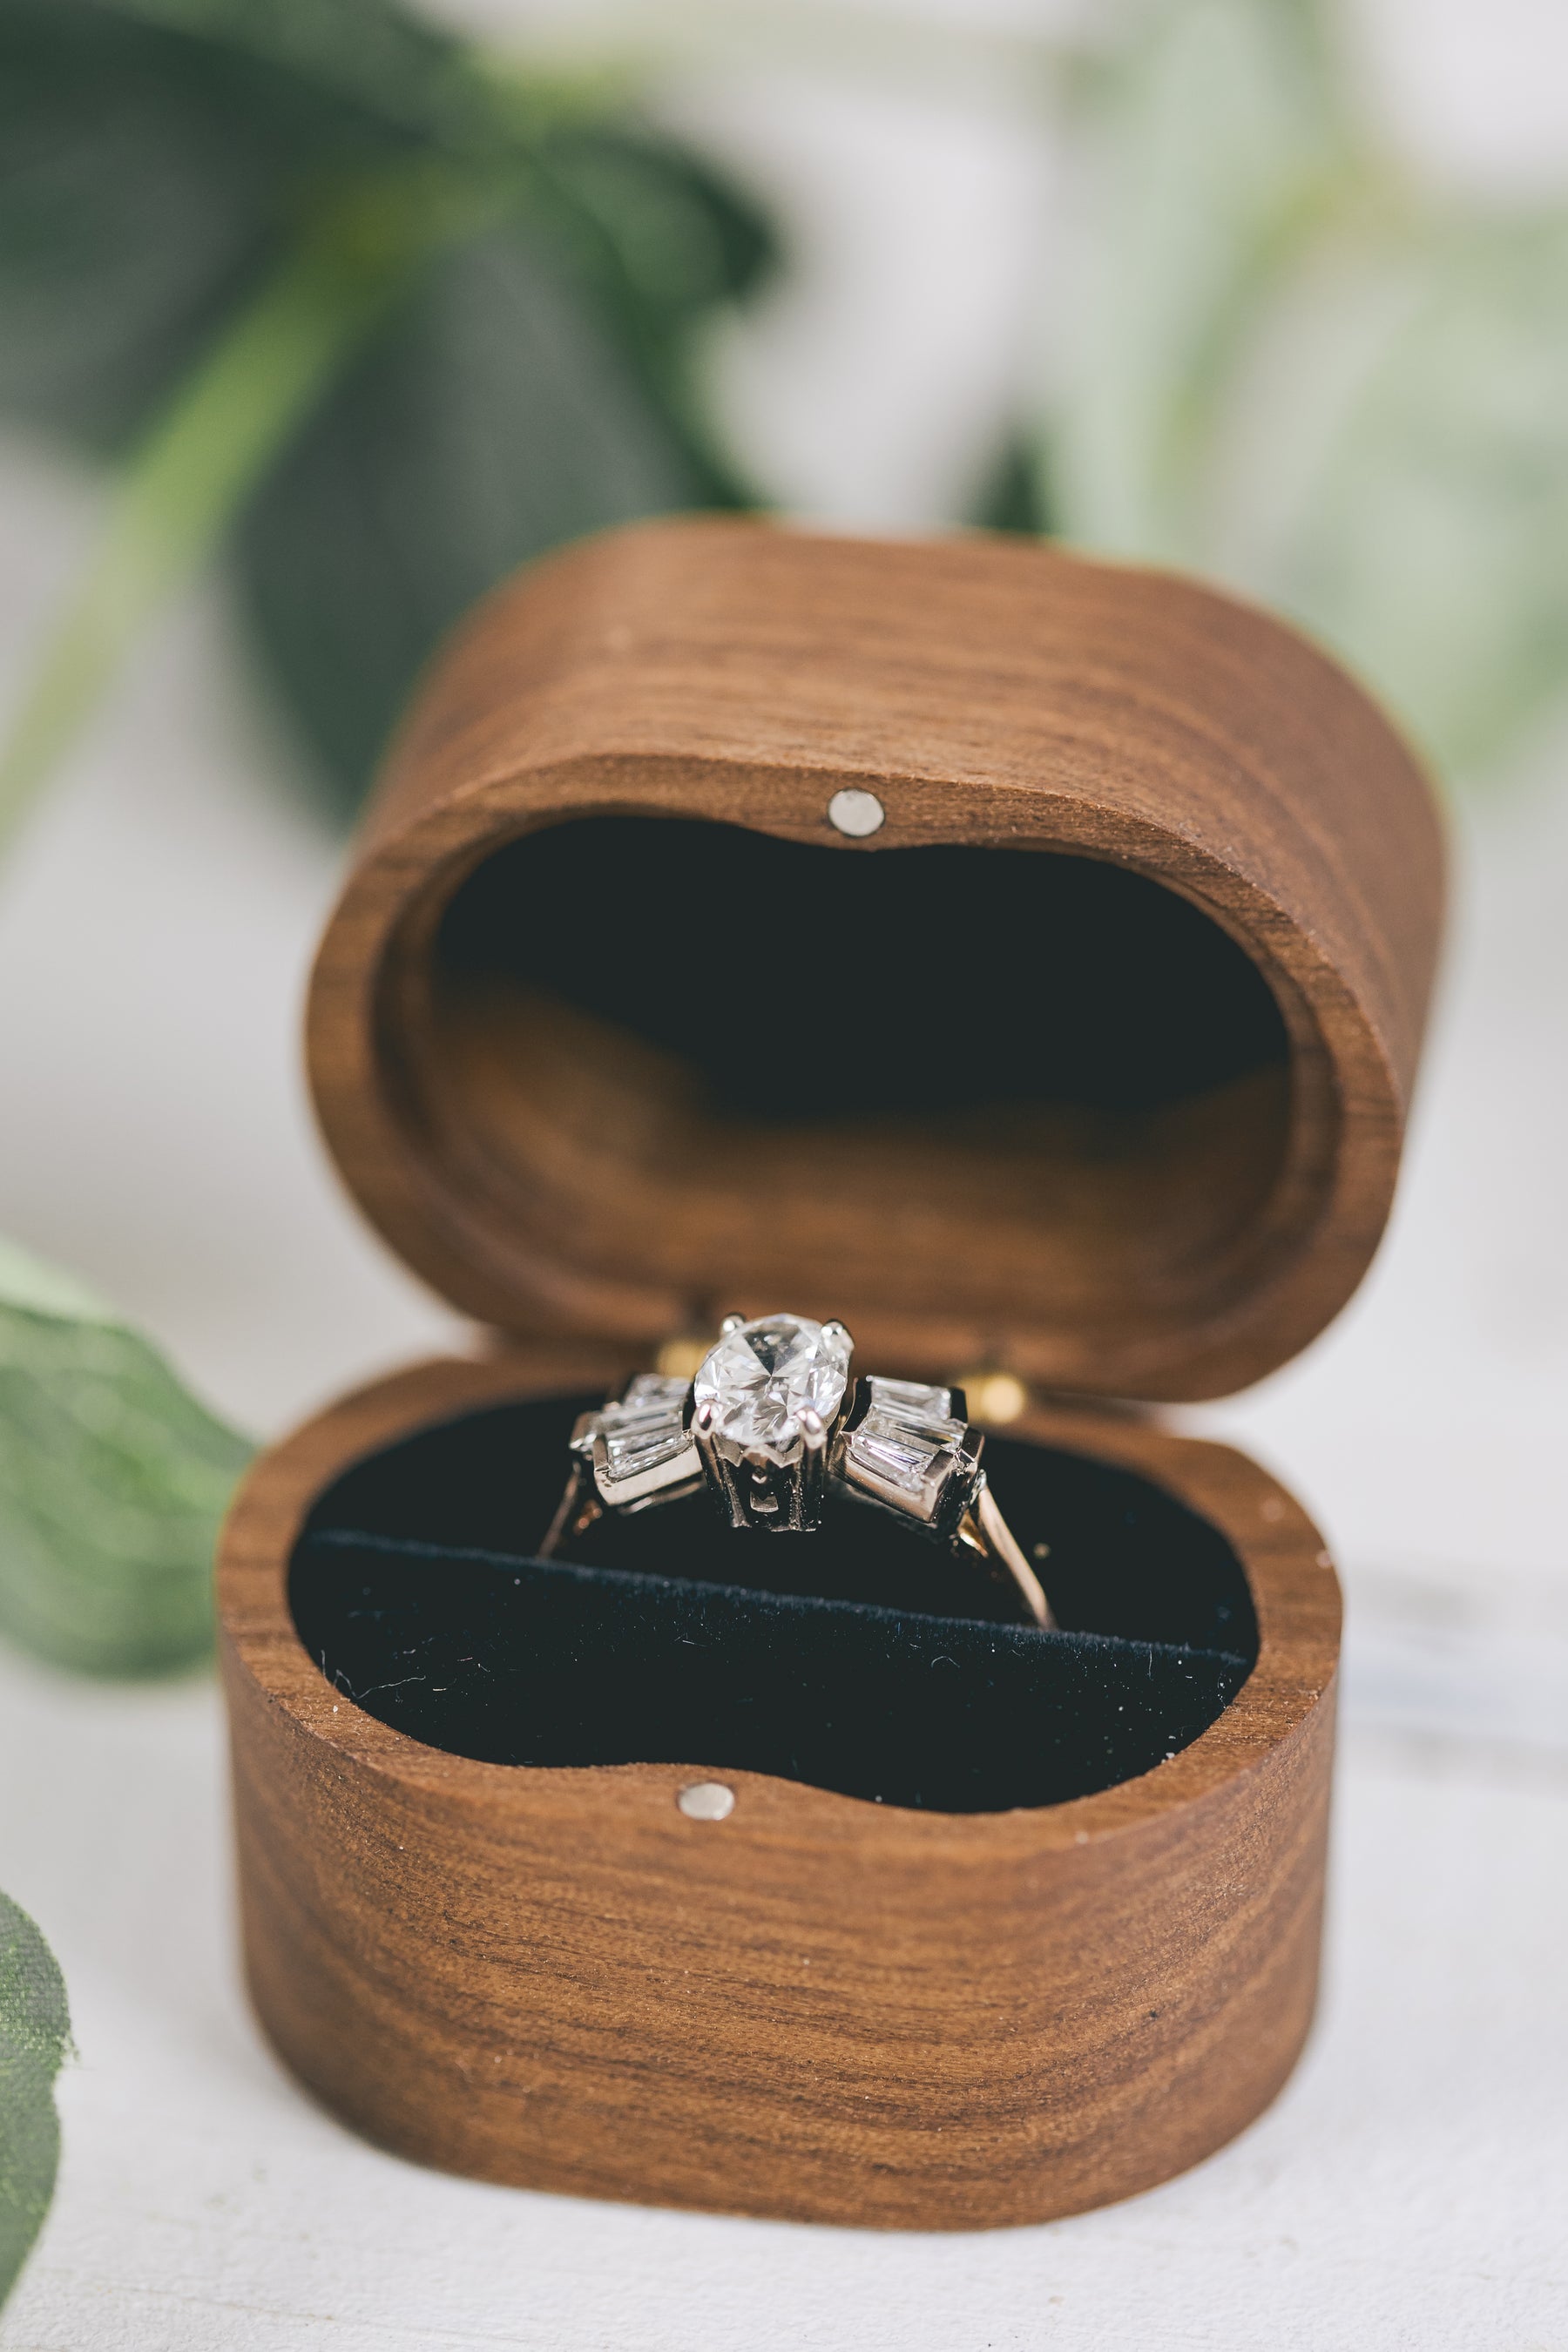 Contemporary Twist on Art Deco Engagement Ring - Boutee